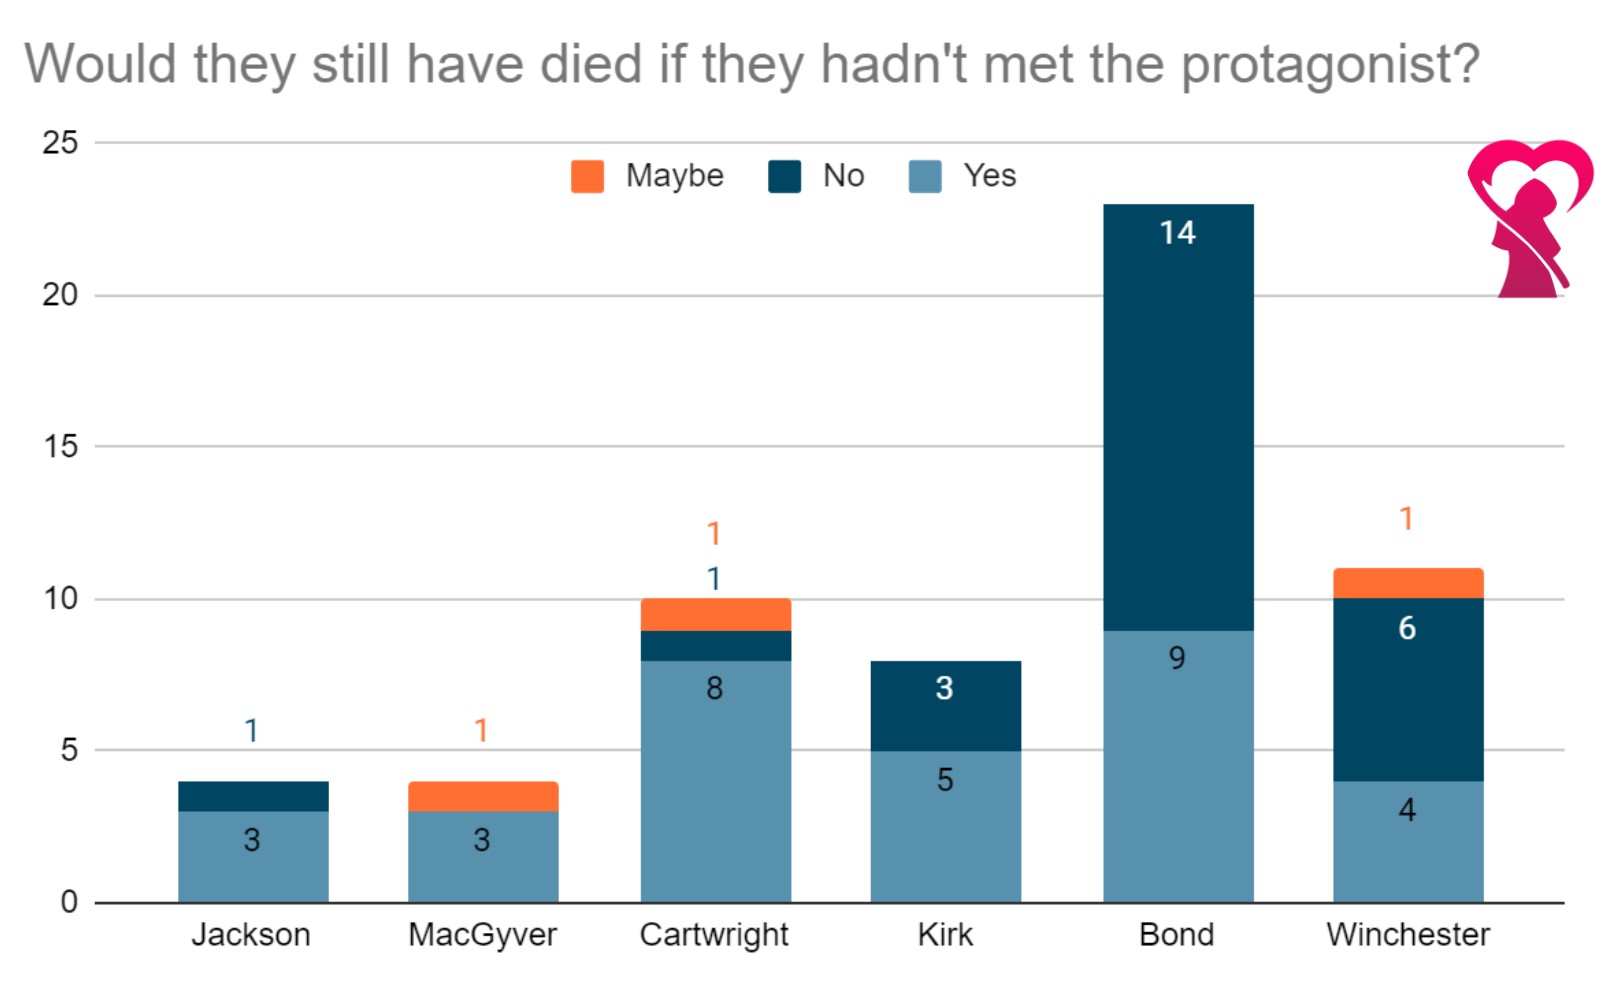 Stacked bar chart labeled "Would they still have died if they hadn't met the protagonist?" Jackson is 3 yes and 1 no, MacGyver is 3 yes and 1 maybe, Cartwright is 8 yes, 1 no, 1 maybe, Kirk is 5 yes and 3 no, Bond is 9 yes and 14 no, Winchester is 4 yes, 9 no, 1 maybe